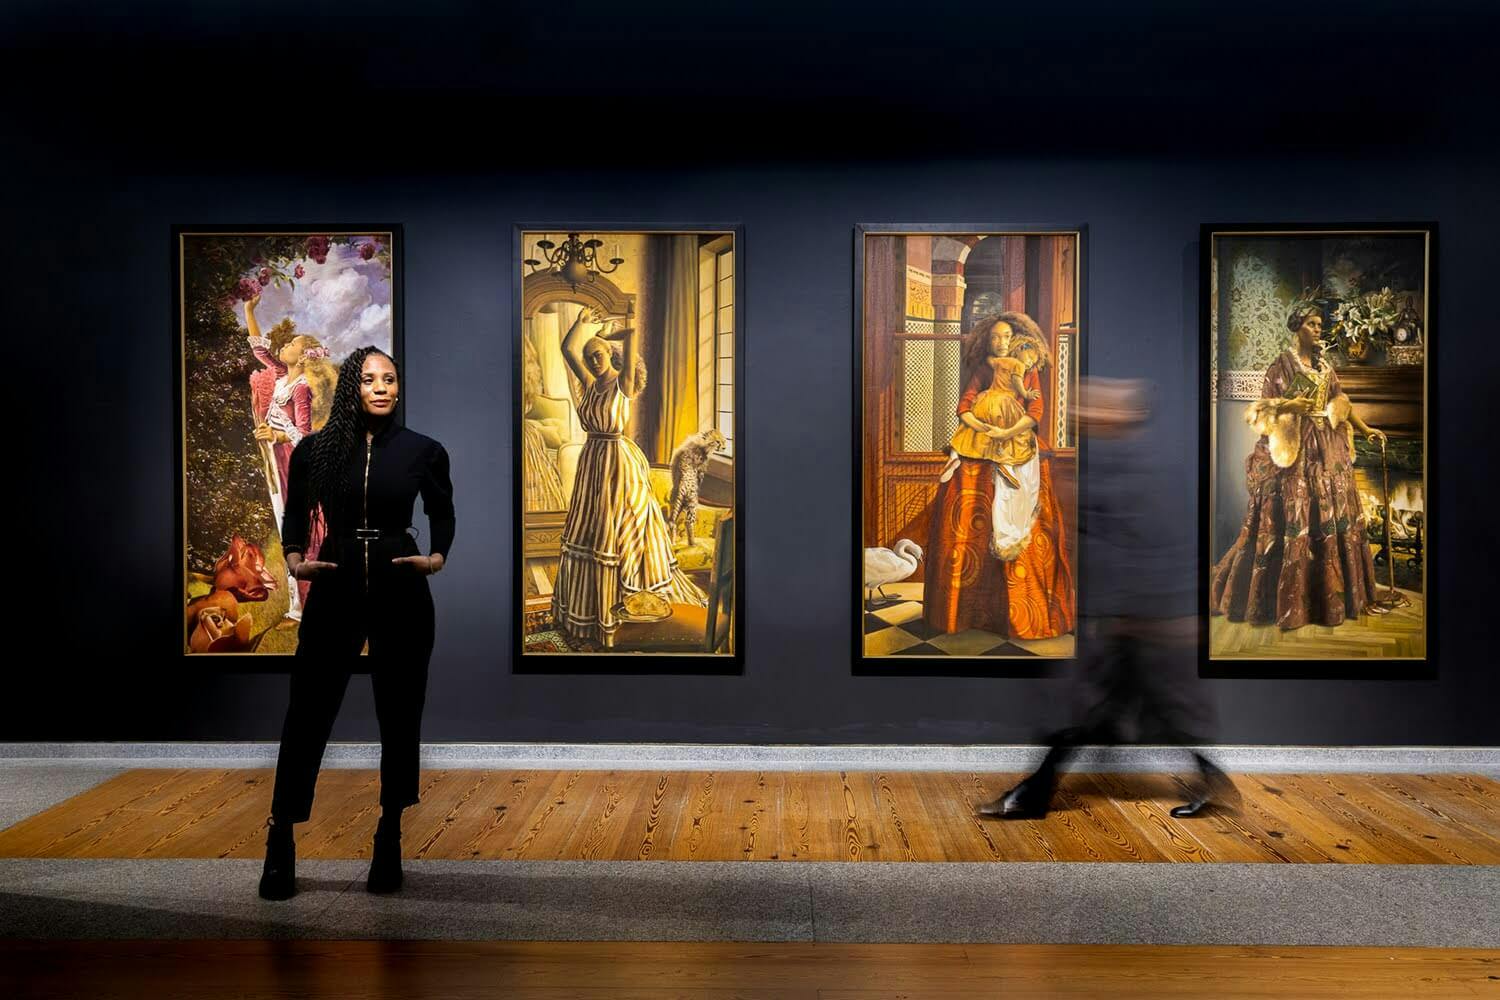 Elizabeth Colomba stands in front of a series of fairytale inspired images, set against a navy blue wall.